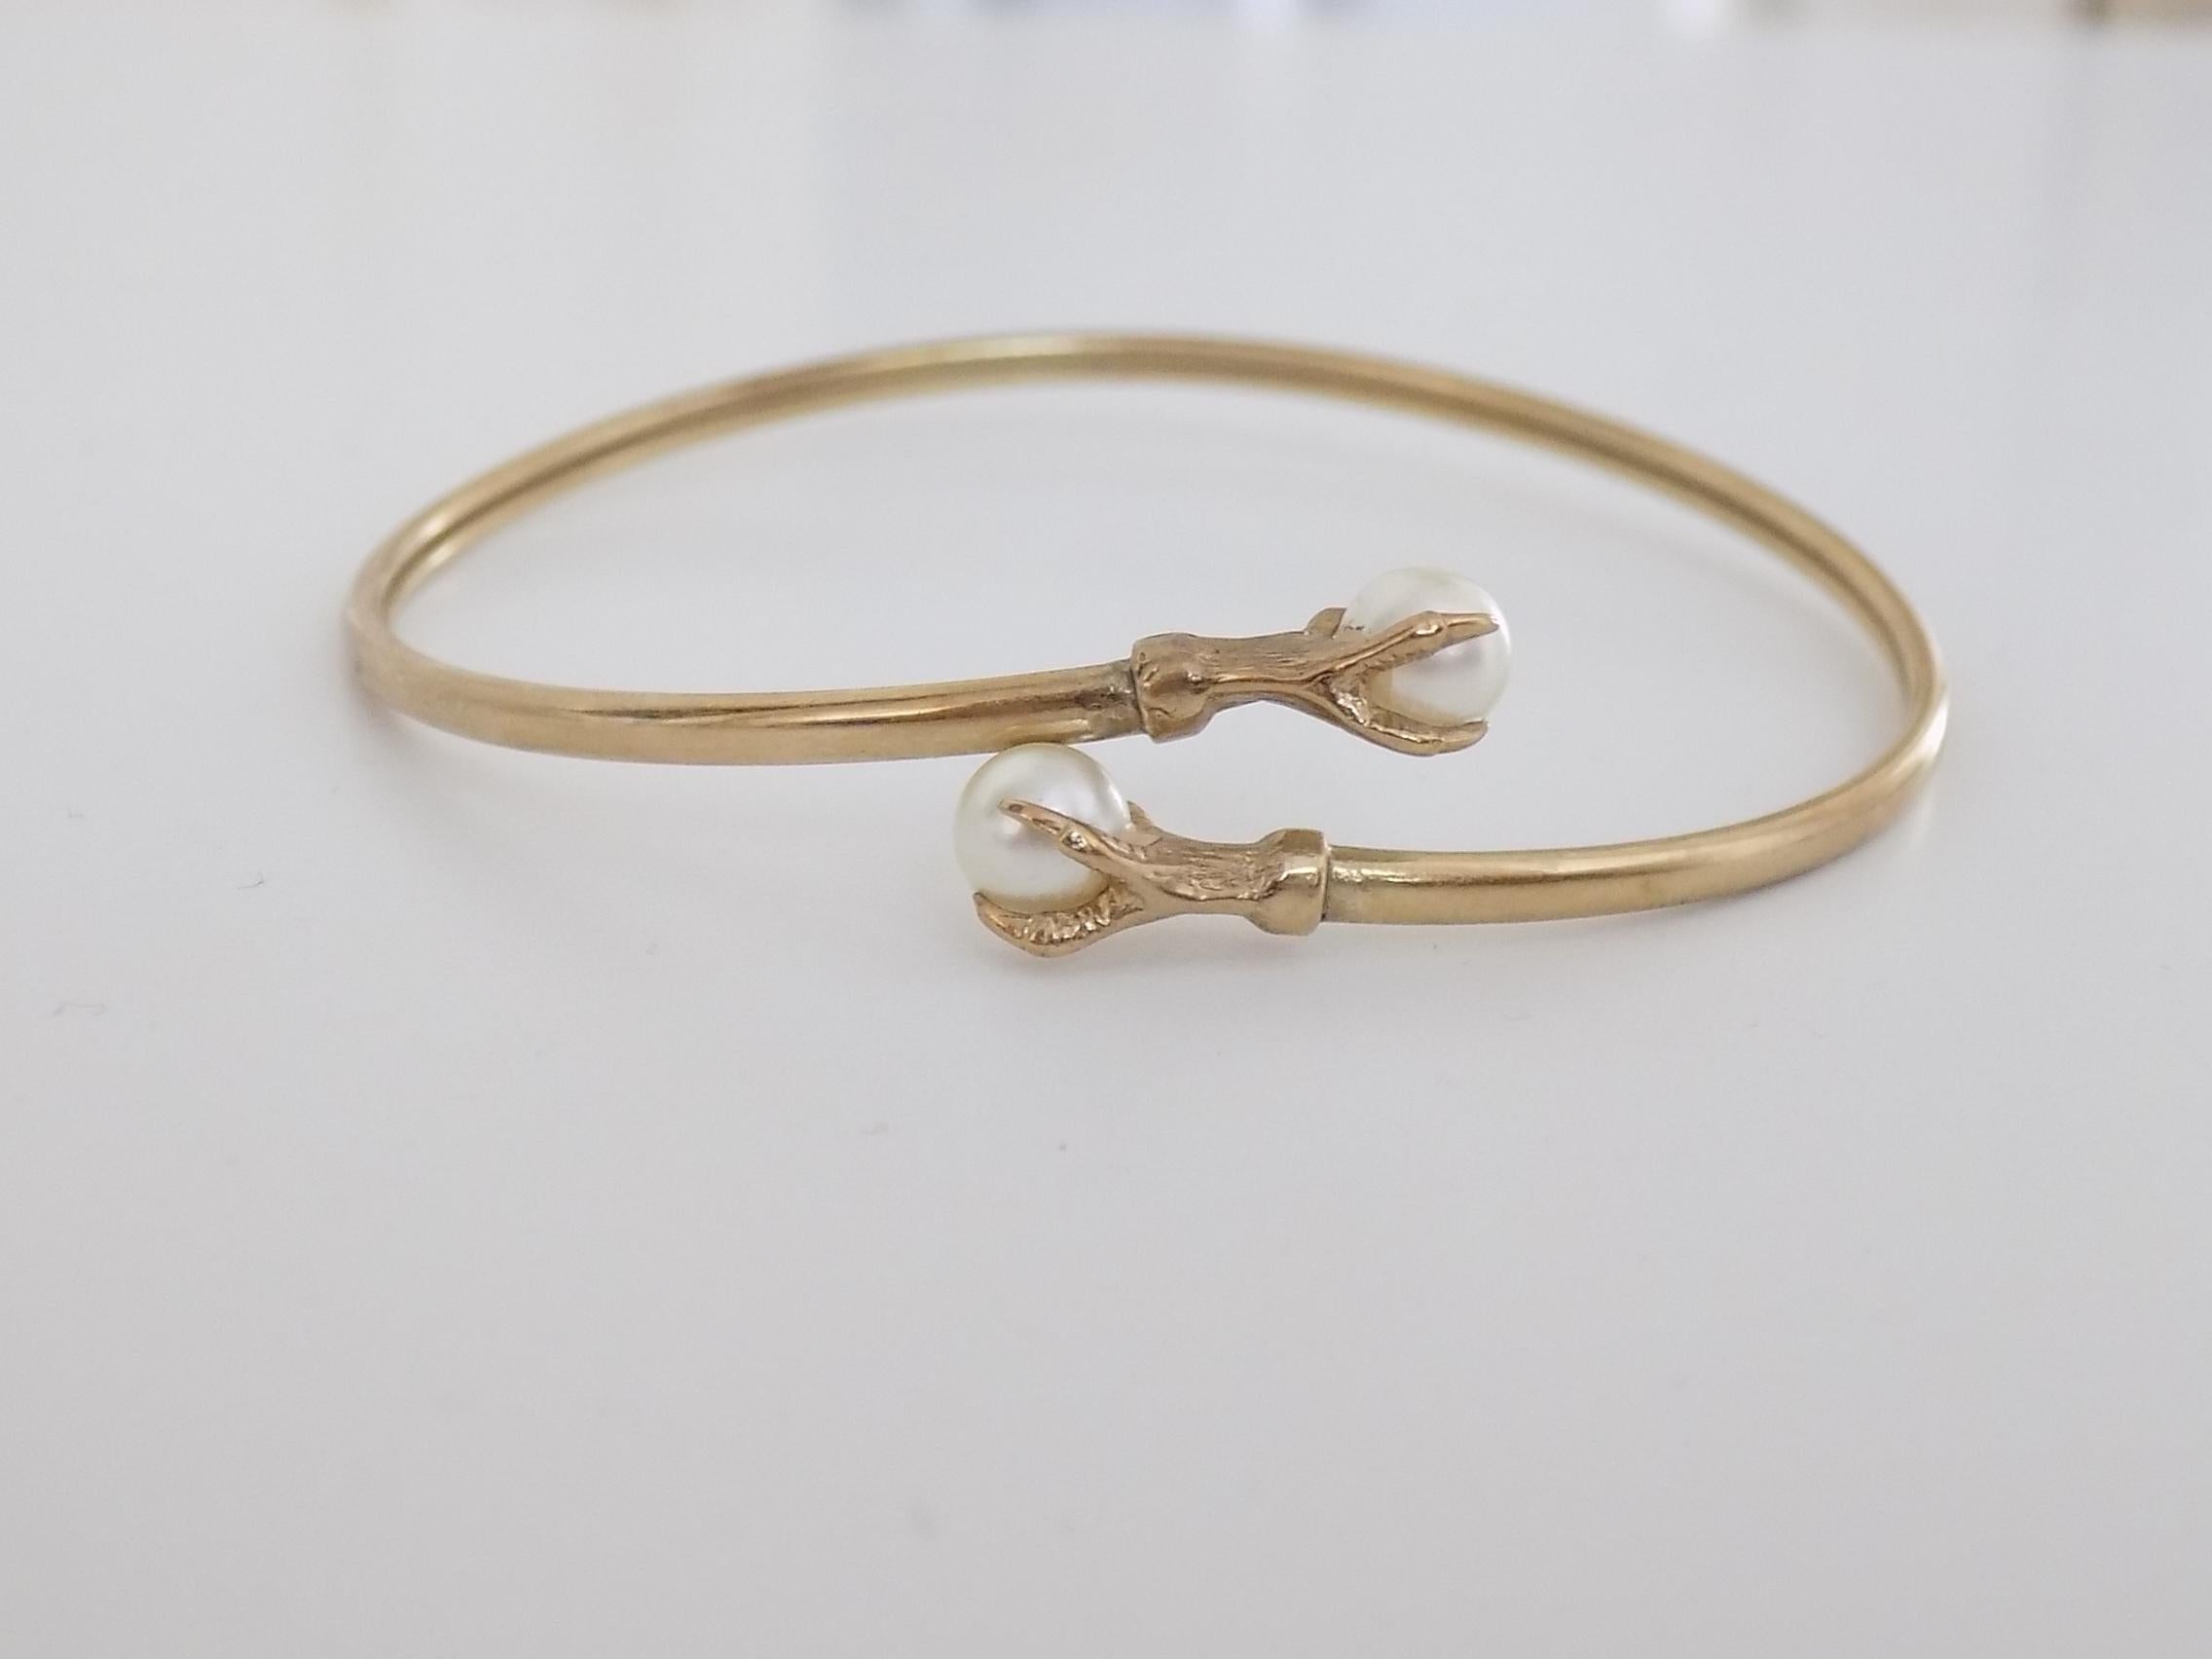 A Lovely Vintage 9 Carat Gold and faux Pearl Claw bypass  bangle. English Origin.

Width inside 63mm
Weight 5.6gr
Full English hallmark for Birmingham, 9 Carat Gold and dated 1965.

The bangle in very good condition and ready to wear.